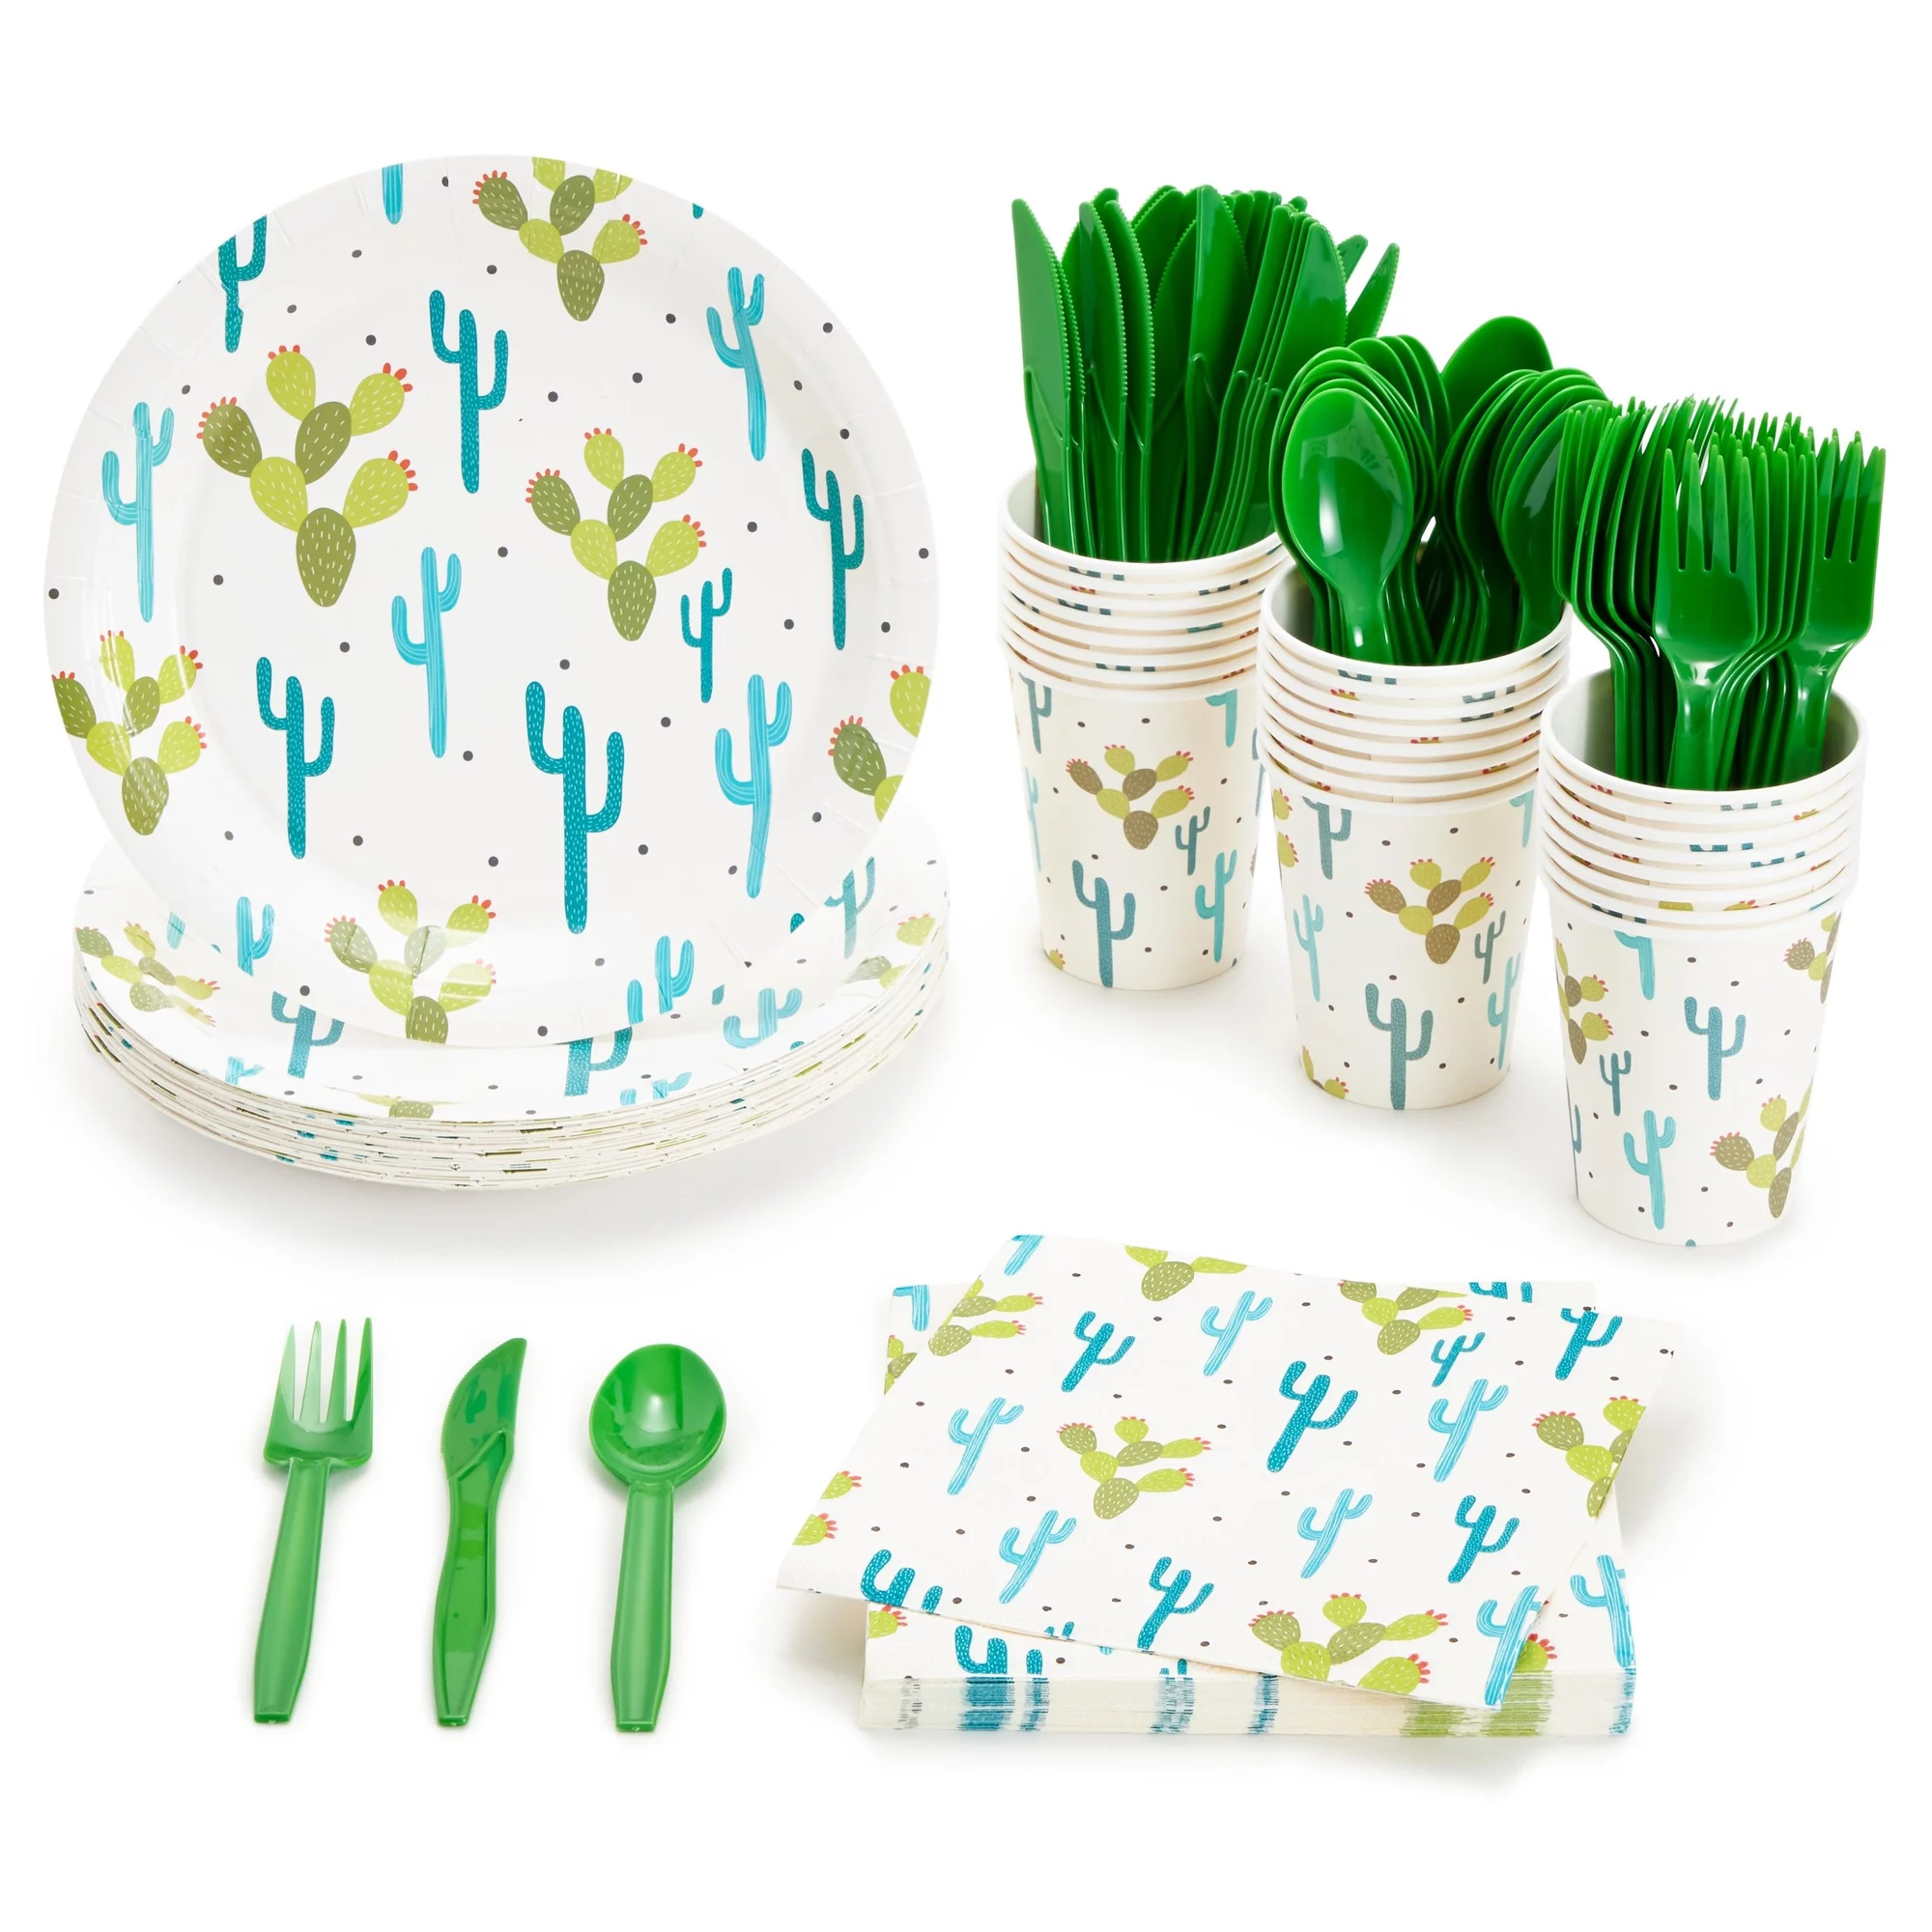 144-Pieces of Cactus Party Supplies with Succulent Plates, Napkins, Cups and Cutlery for Fiesta Party Celebration, Birthday, Taco Baby Shower Decorations (Serves 24)